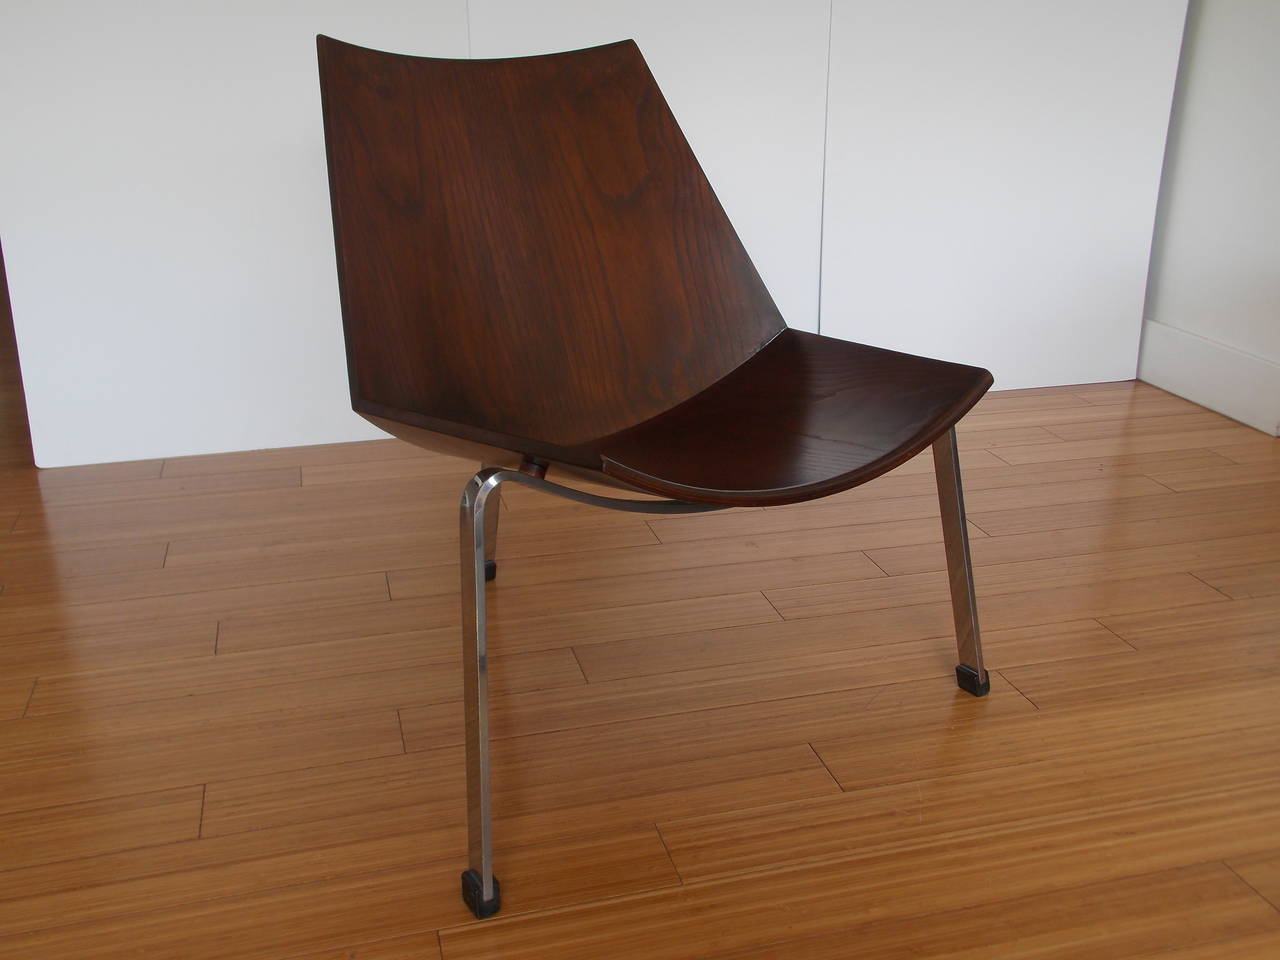 A nice well constructed chair.
This design was so advanced for its time.
The seat is made of bent plywood with oak veneer.
It has been refinished.
The base is made of chrome-plated steel with rubber feet.
The shock-mounts are made of